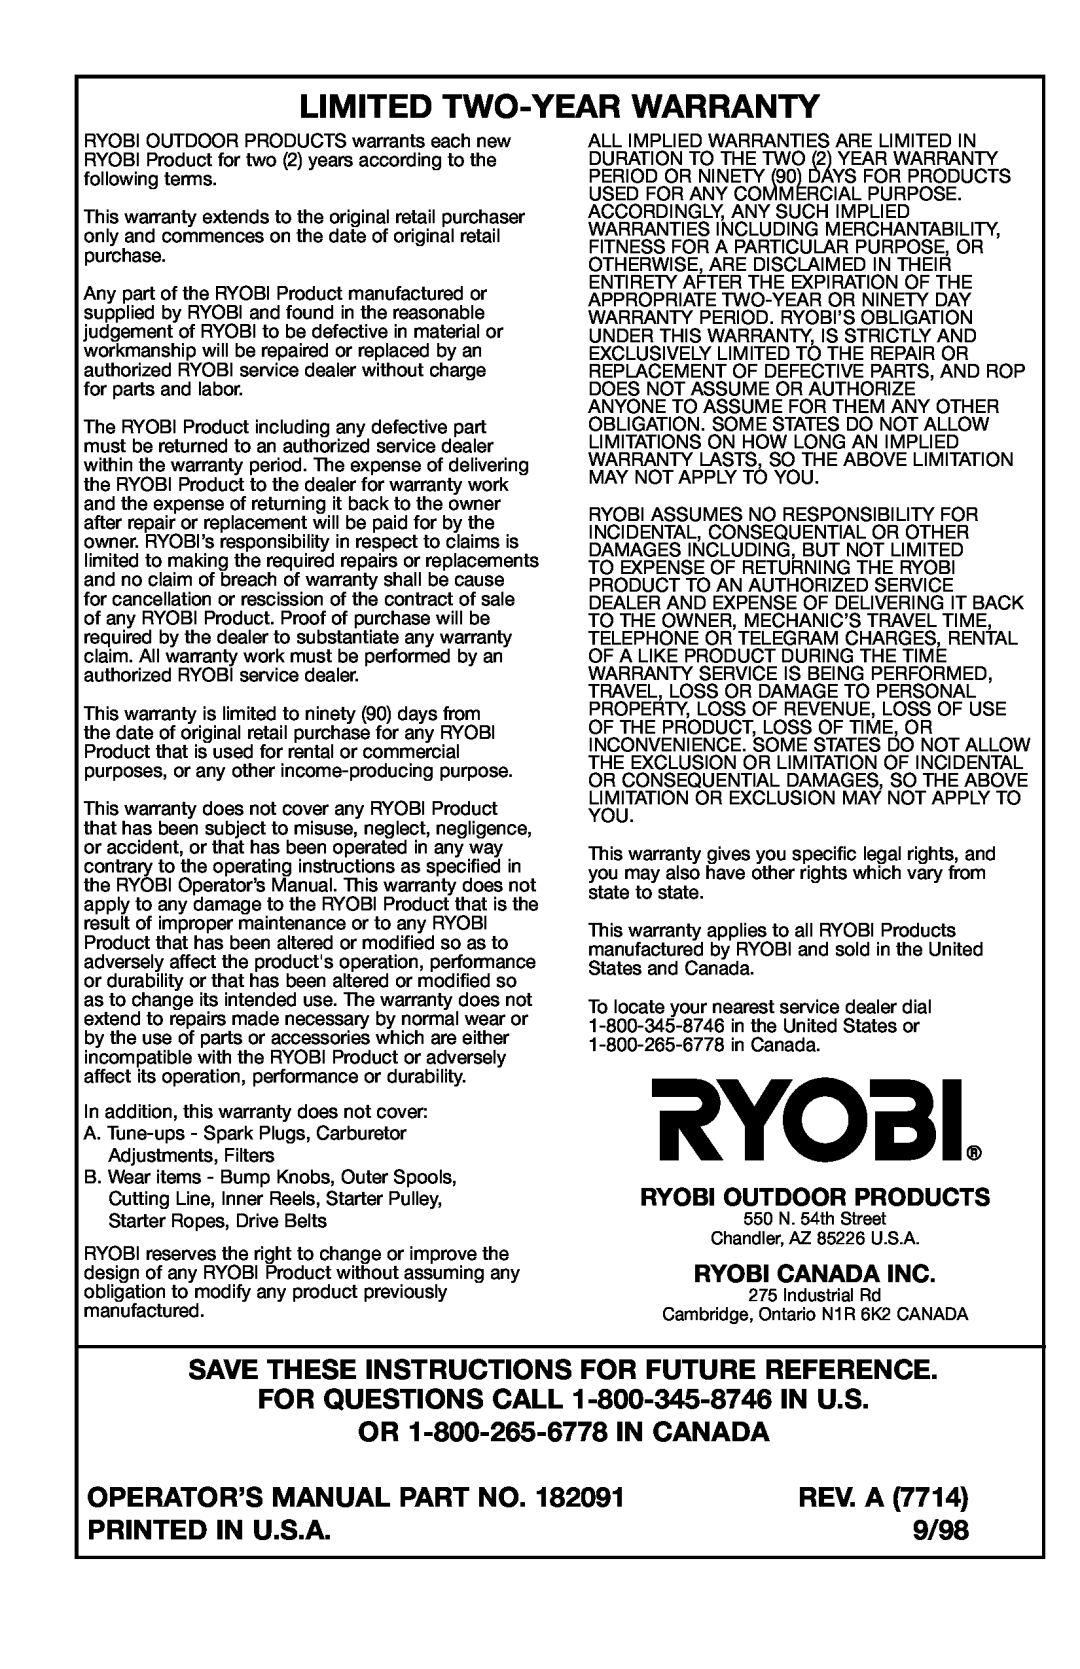 Ryobi 780r Limited Two-Year Warranty, Save These Instructions For Future Reference, Operator’S Manual Part No, Rev. A 